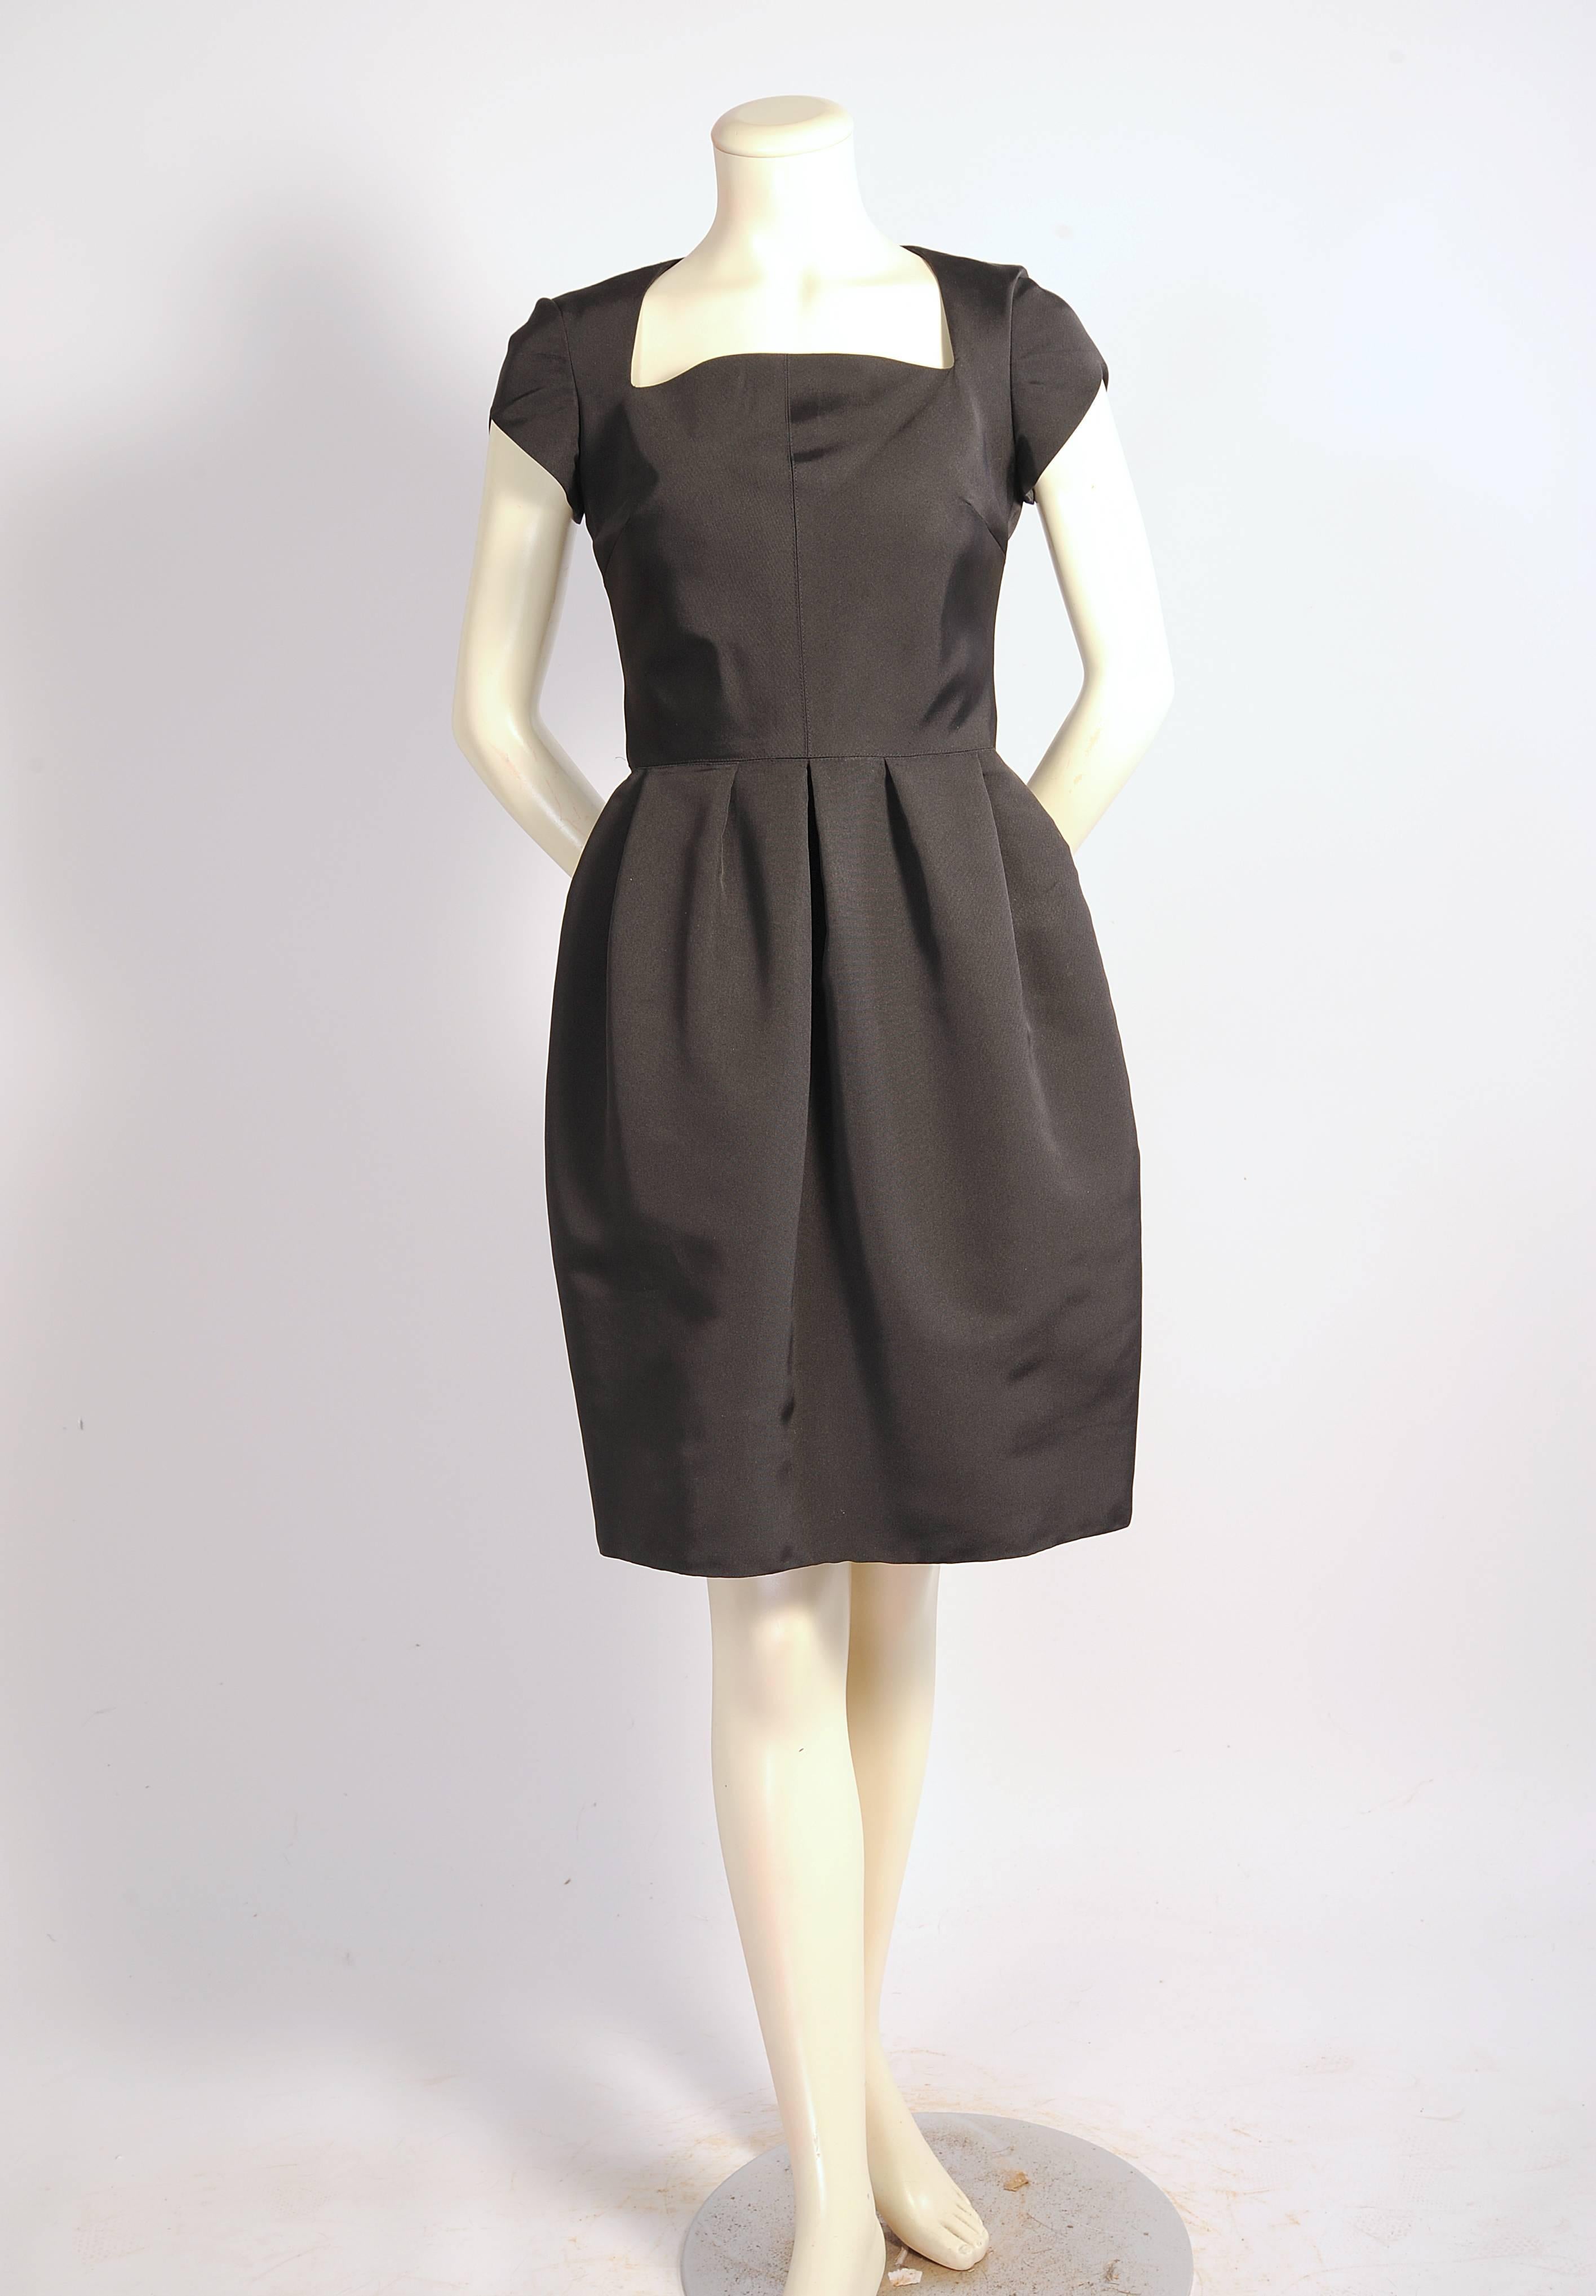 Th perfect jewelry dress, this chic black silk cocktail dress designed by Oscar de la Renta is a perfect dress for your best jewels. The dress has a square neckline and short sleeves above a fitted bodice, The gently gathered skirt is so flattering,